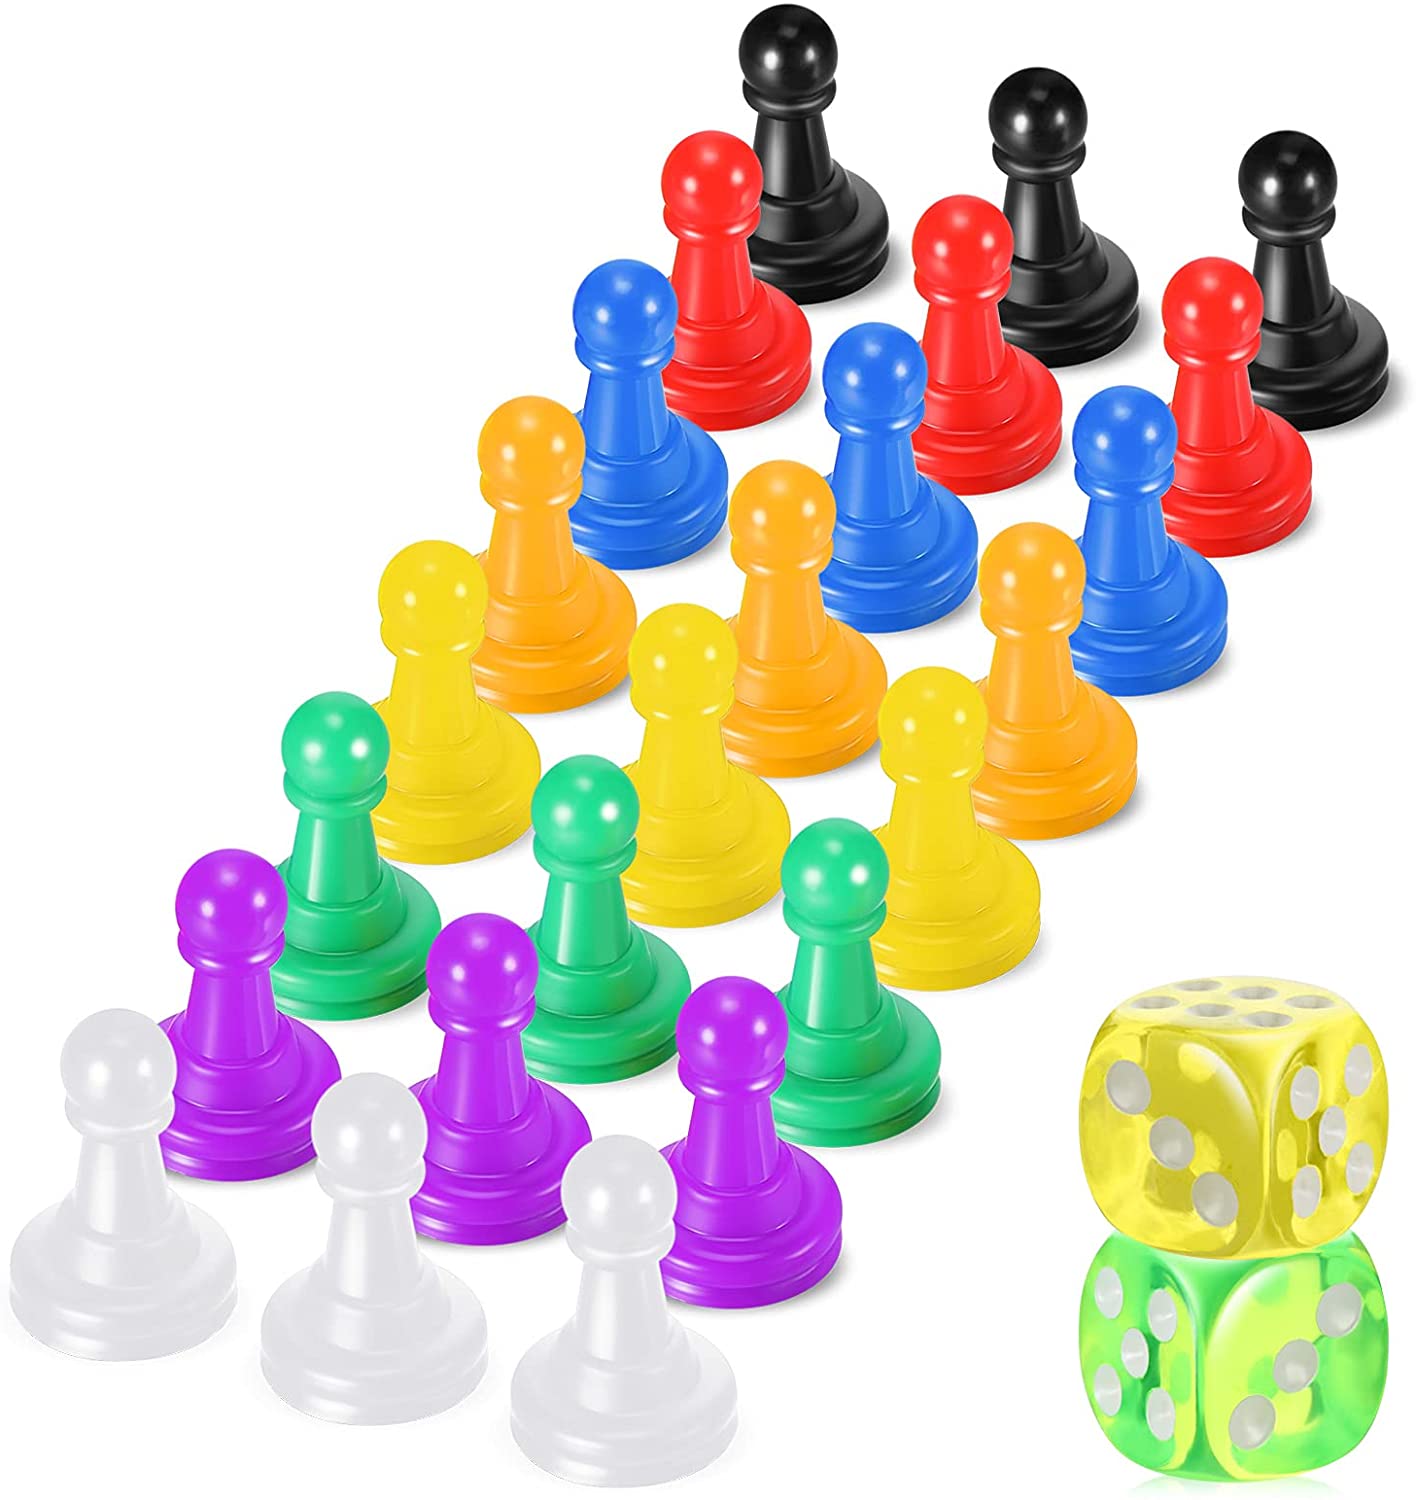 6Pcs Colorful Board Game Chessman Pieces Dice Set Pawn Chess for Card Games 